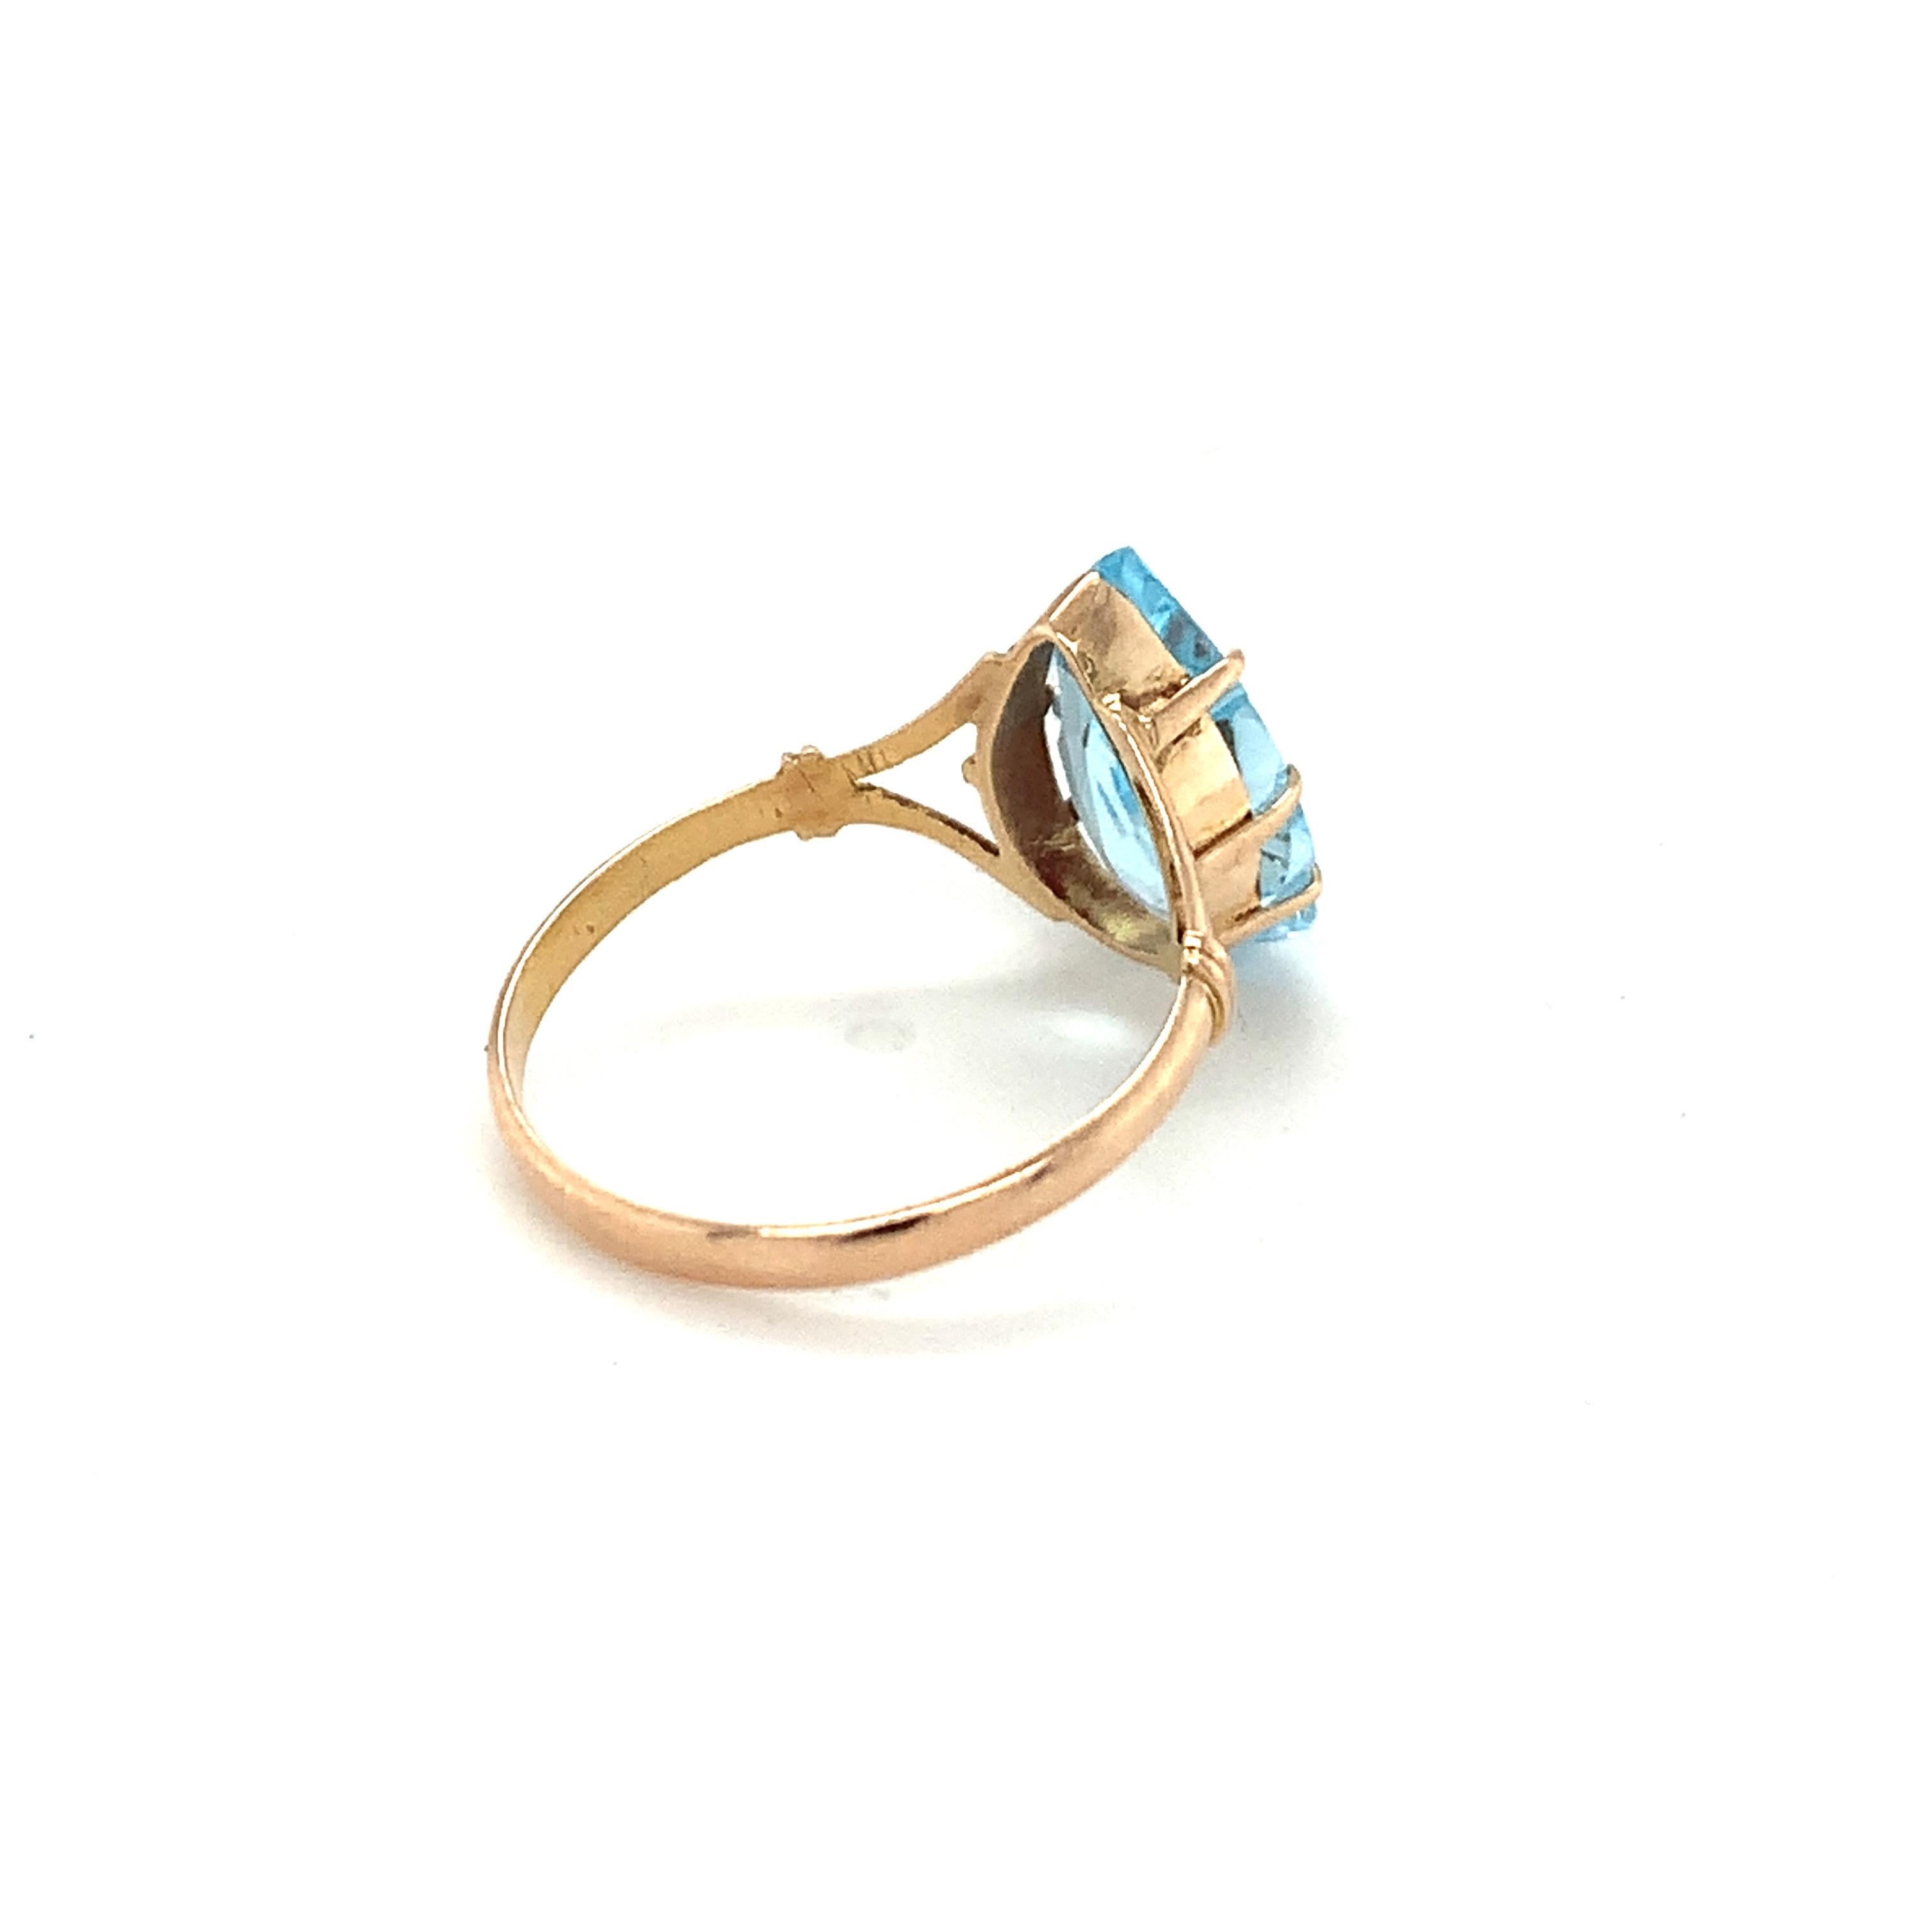 Tear Drop Blue Topaz Ring Set in 14k Yellow Gold In New Condition For Sale In Trumbull, CT